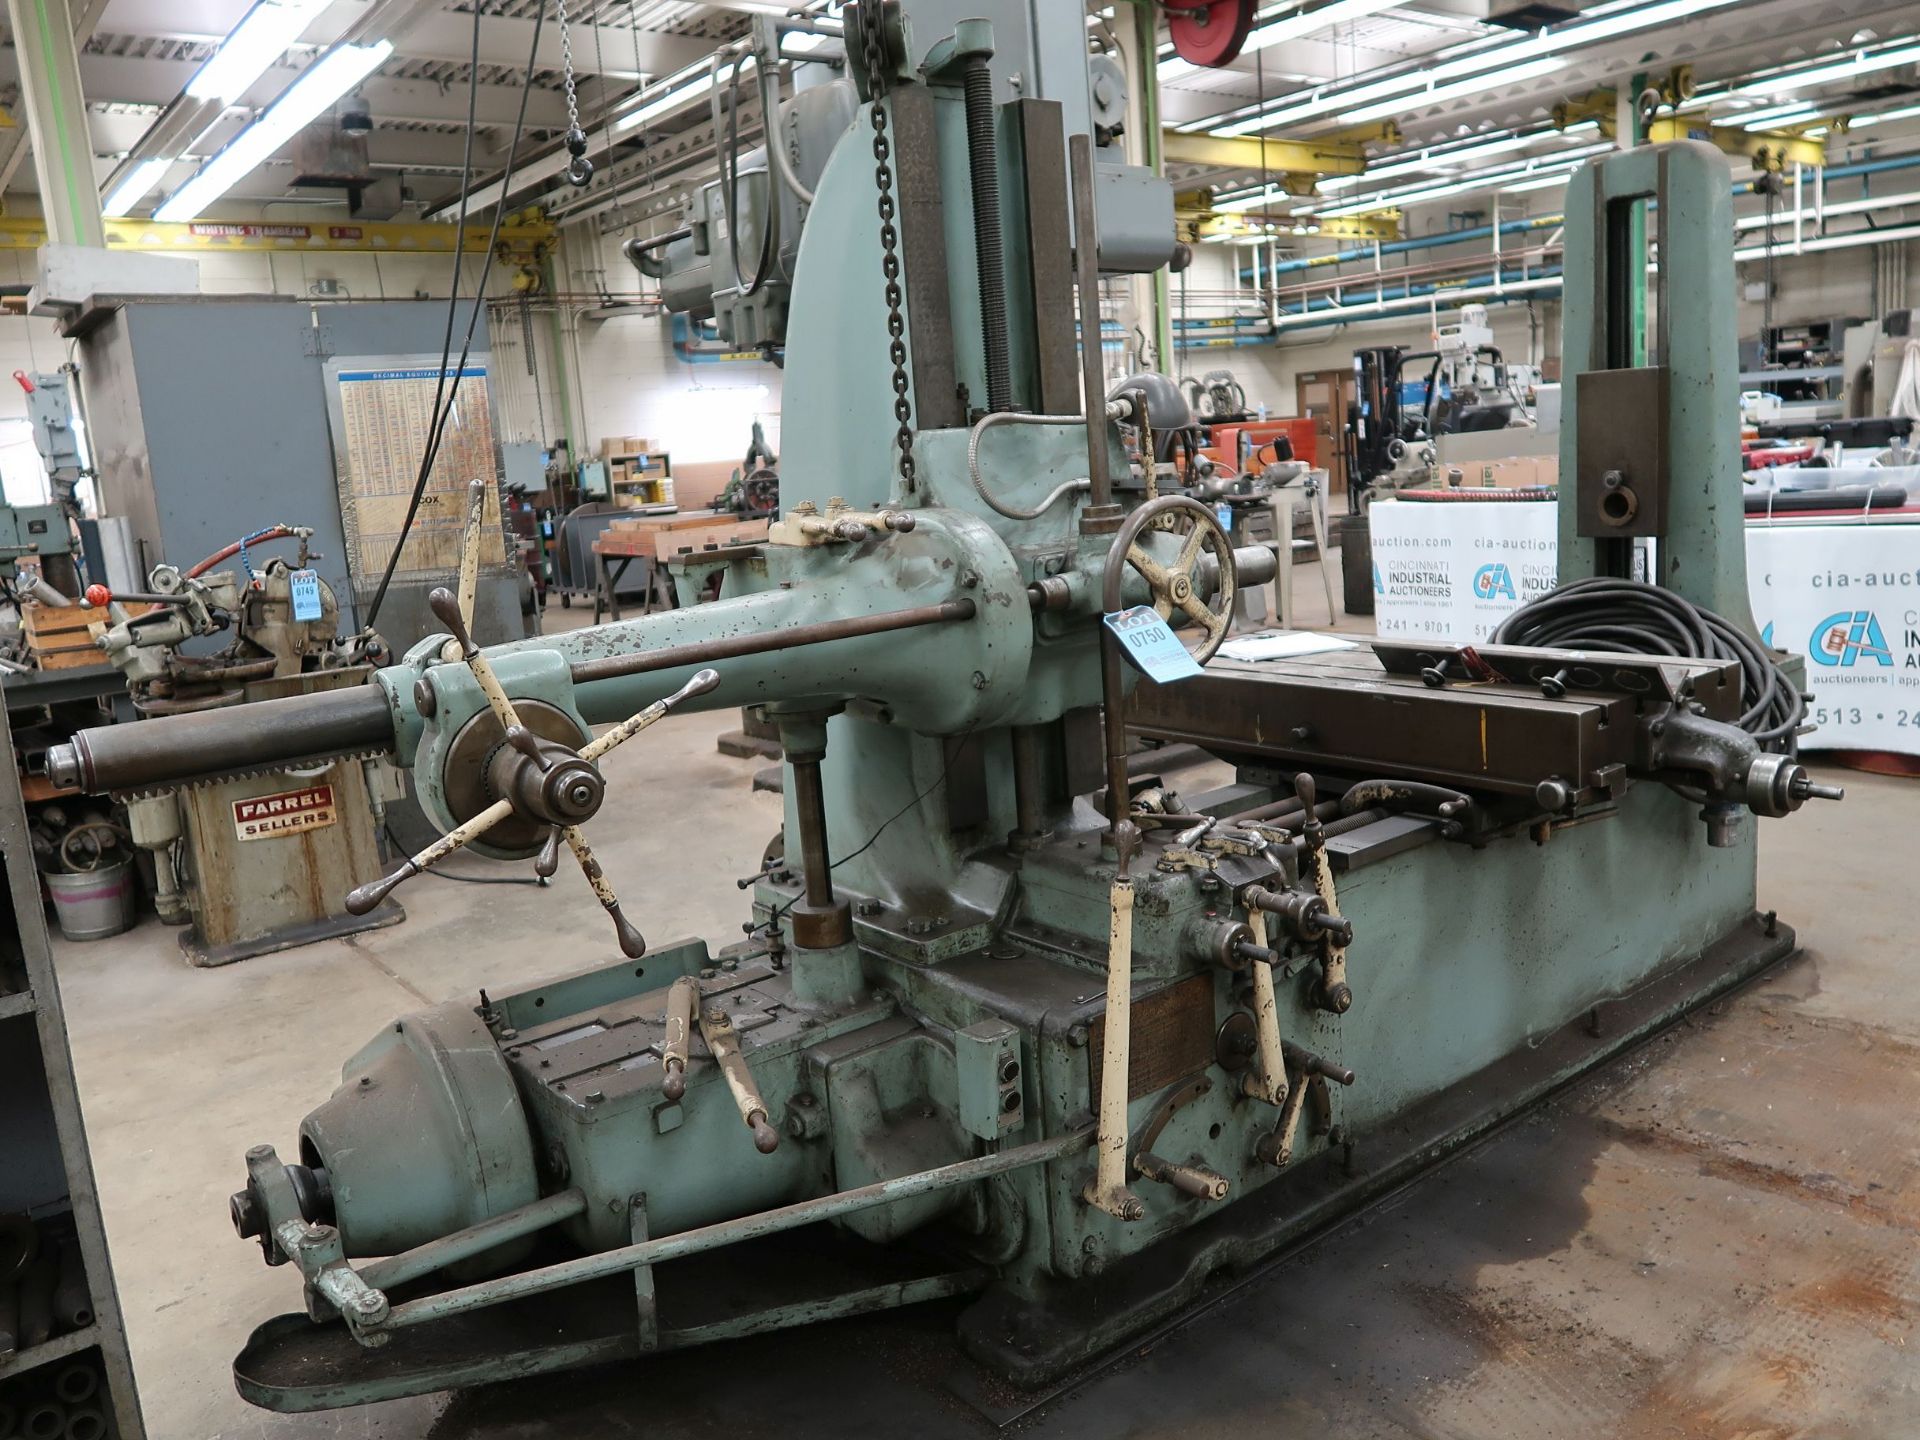 3" LUCAS NO. 31 HORIZONTAL BORING MILL, SPINDLE SPEED 15-200 RPM, 24" X 48" T-SLOTTED TABLE - Image 5 of 11